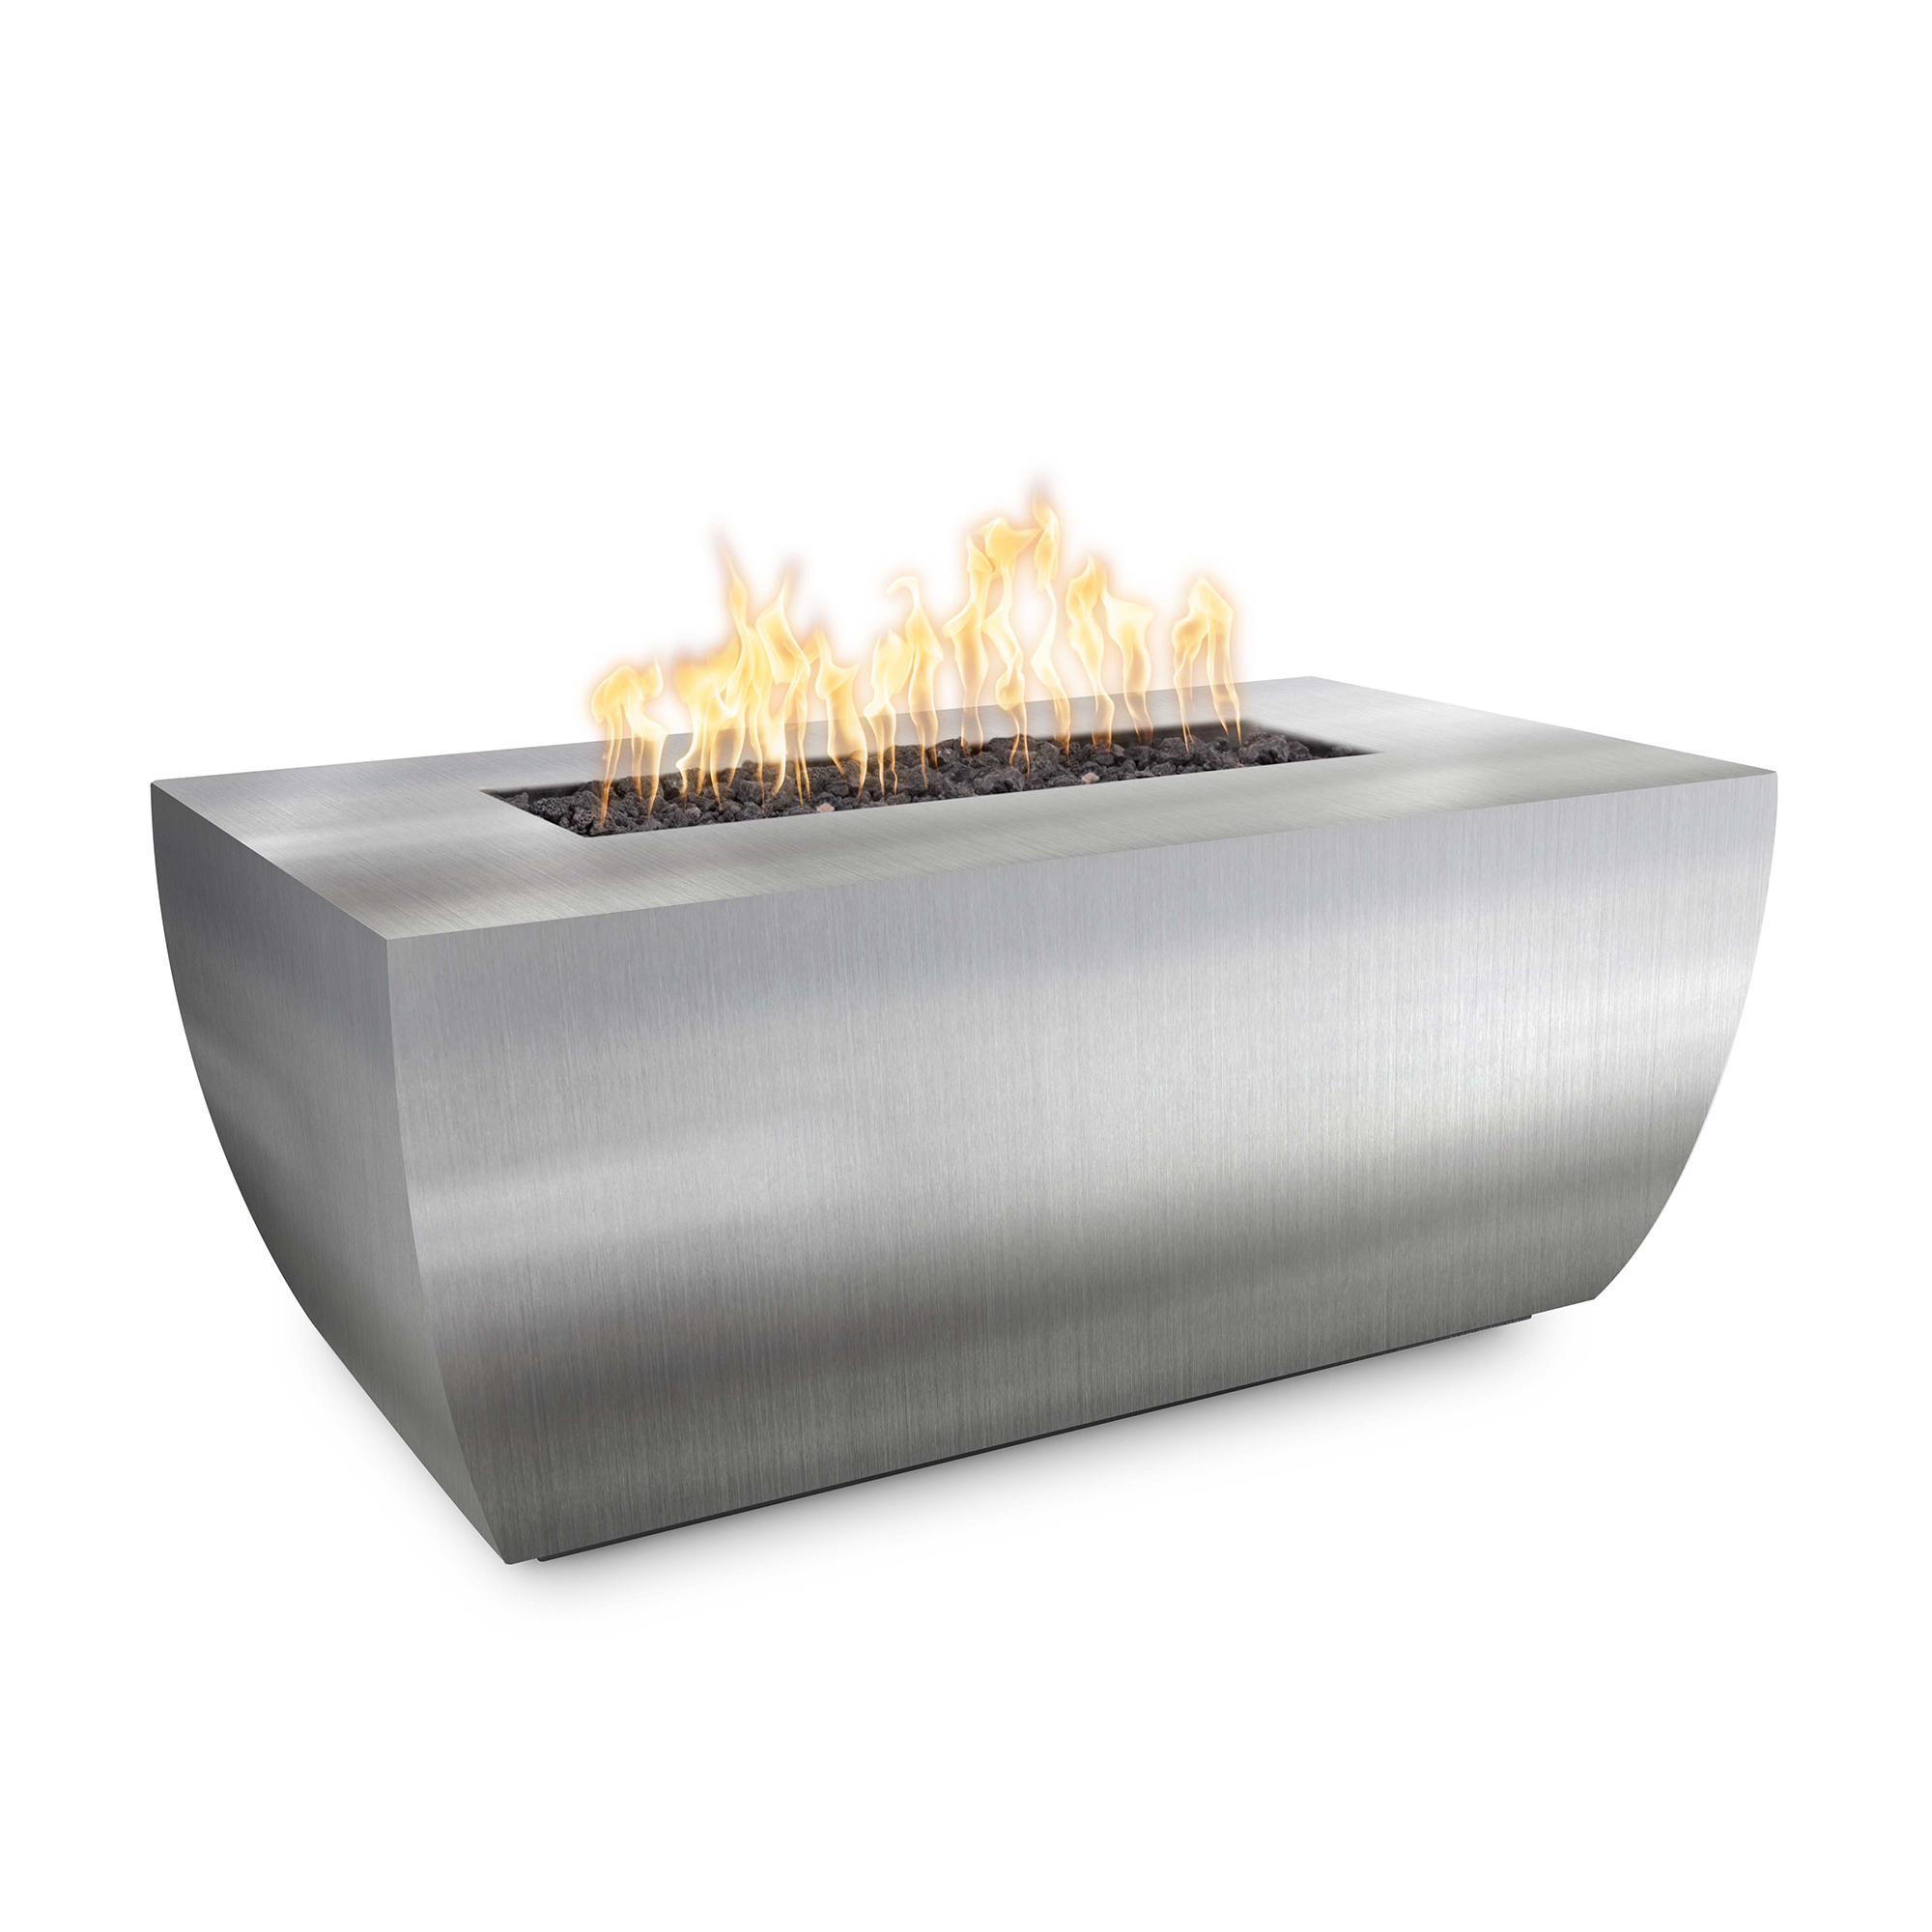 Avalon Linear Fire Pit 24H - Stainless Steel